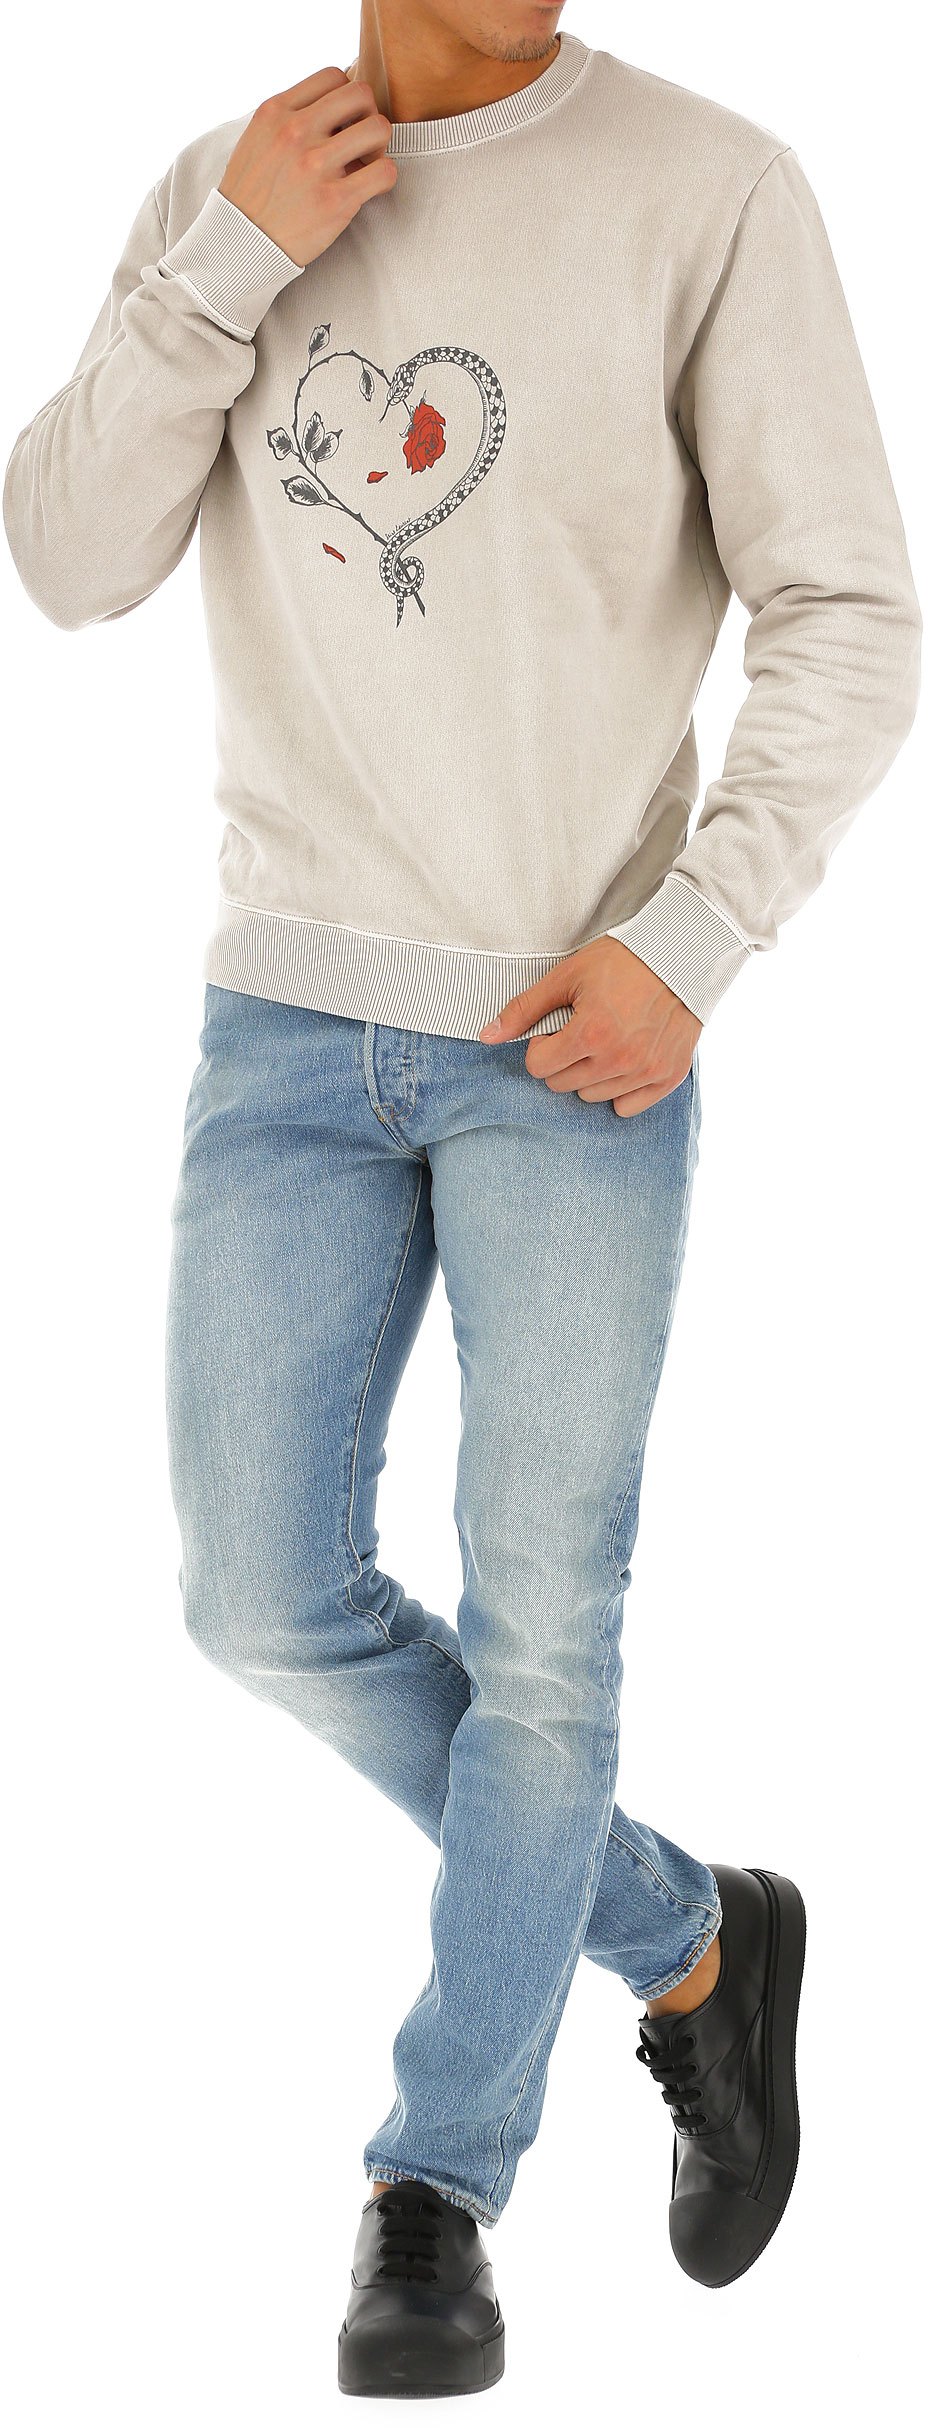 Mens Clothing Levis, Style code: 34268-0025-